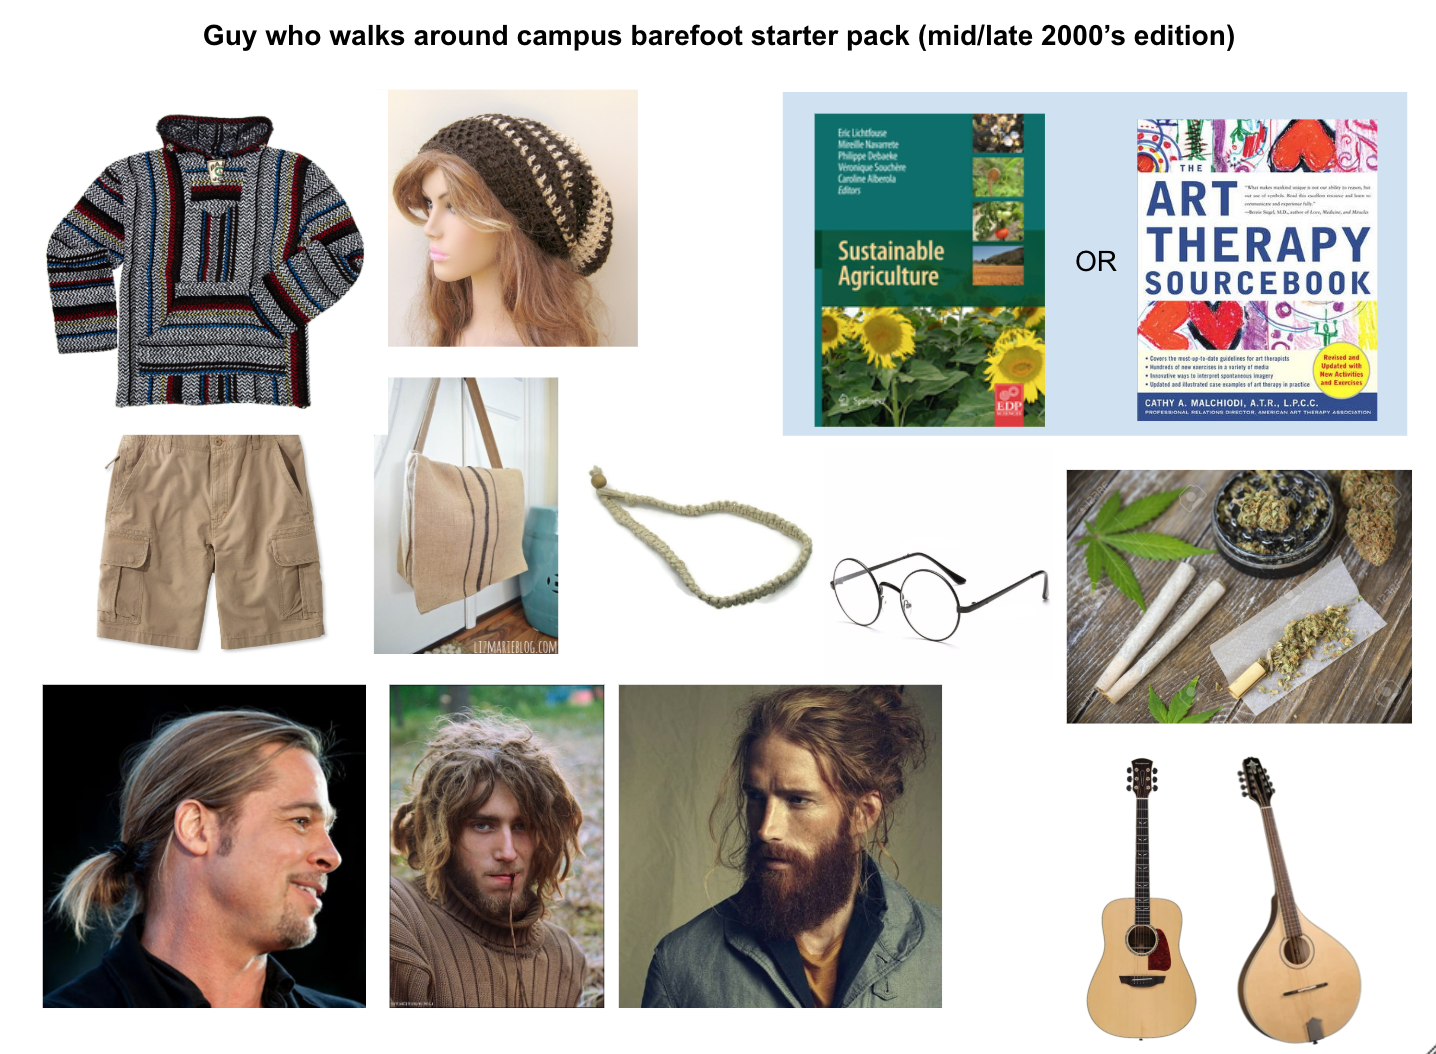 r/collegememes- college dank memes - barefoot   starter pack - Guy who walks around campus barefoot starter pack midlate 2000's edition Sustainable Agriculture Art Therapy Sourcebook Or